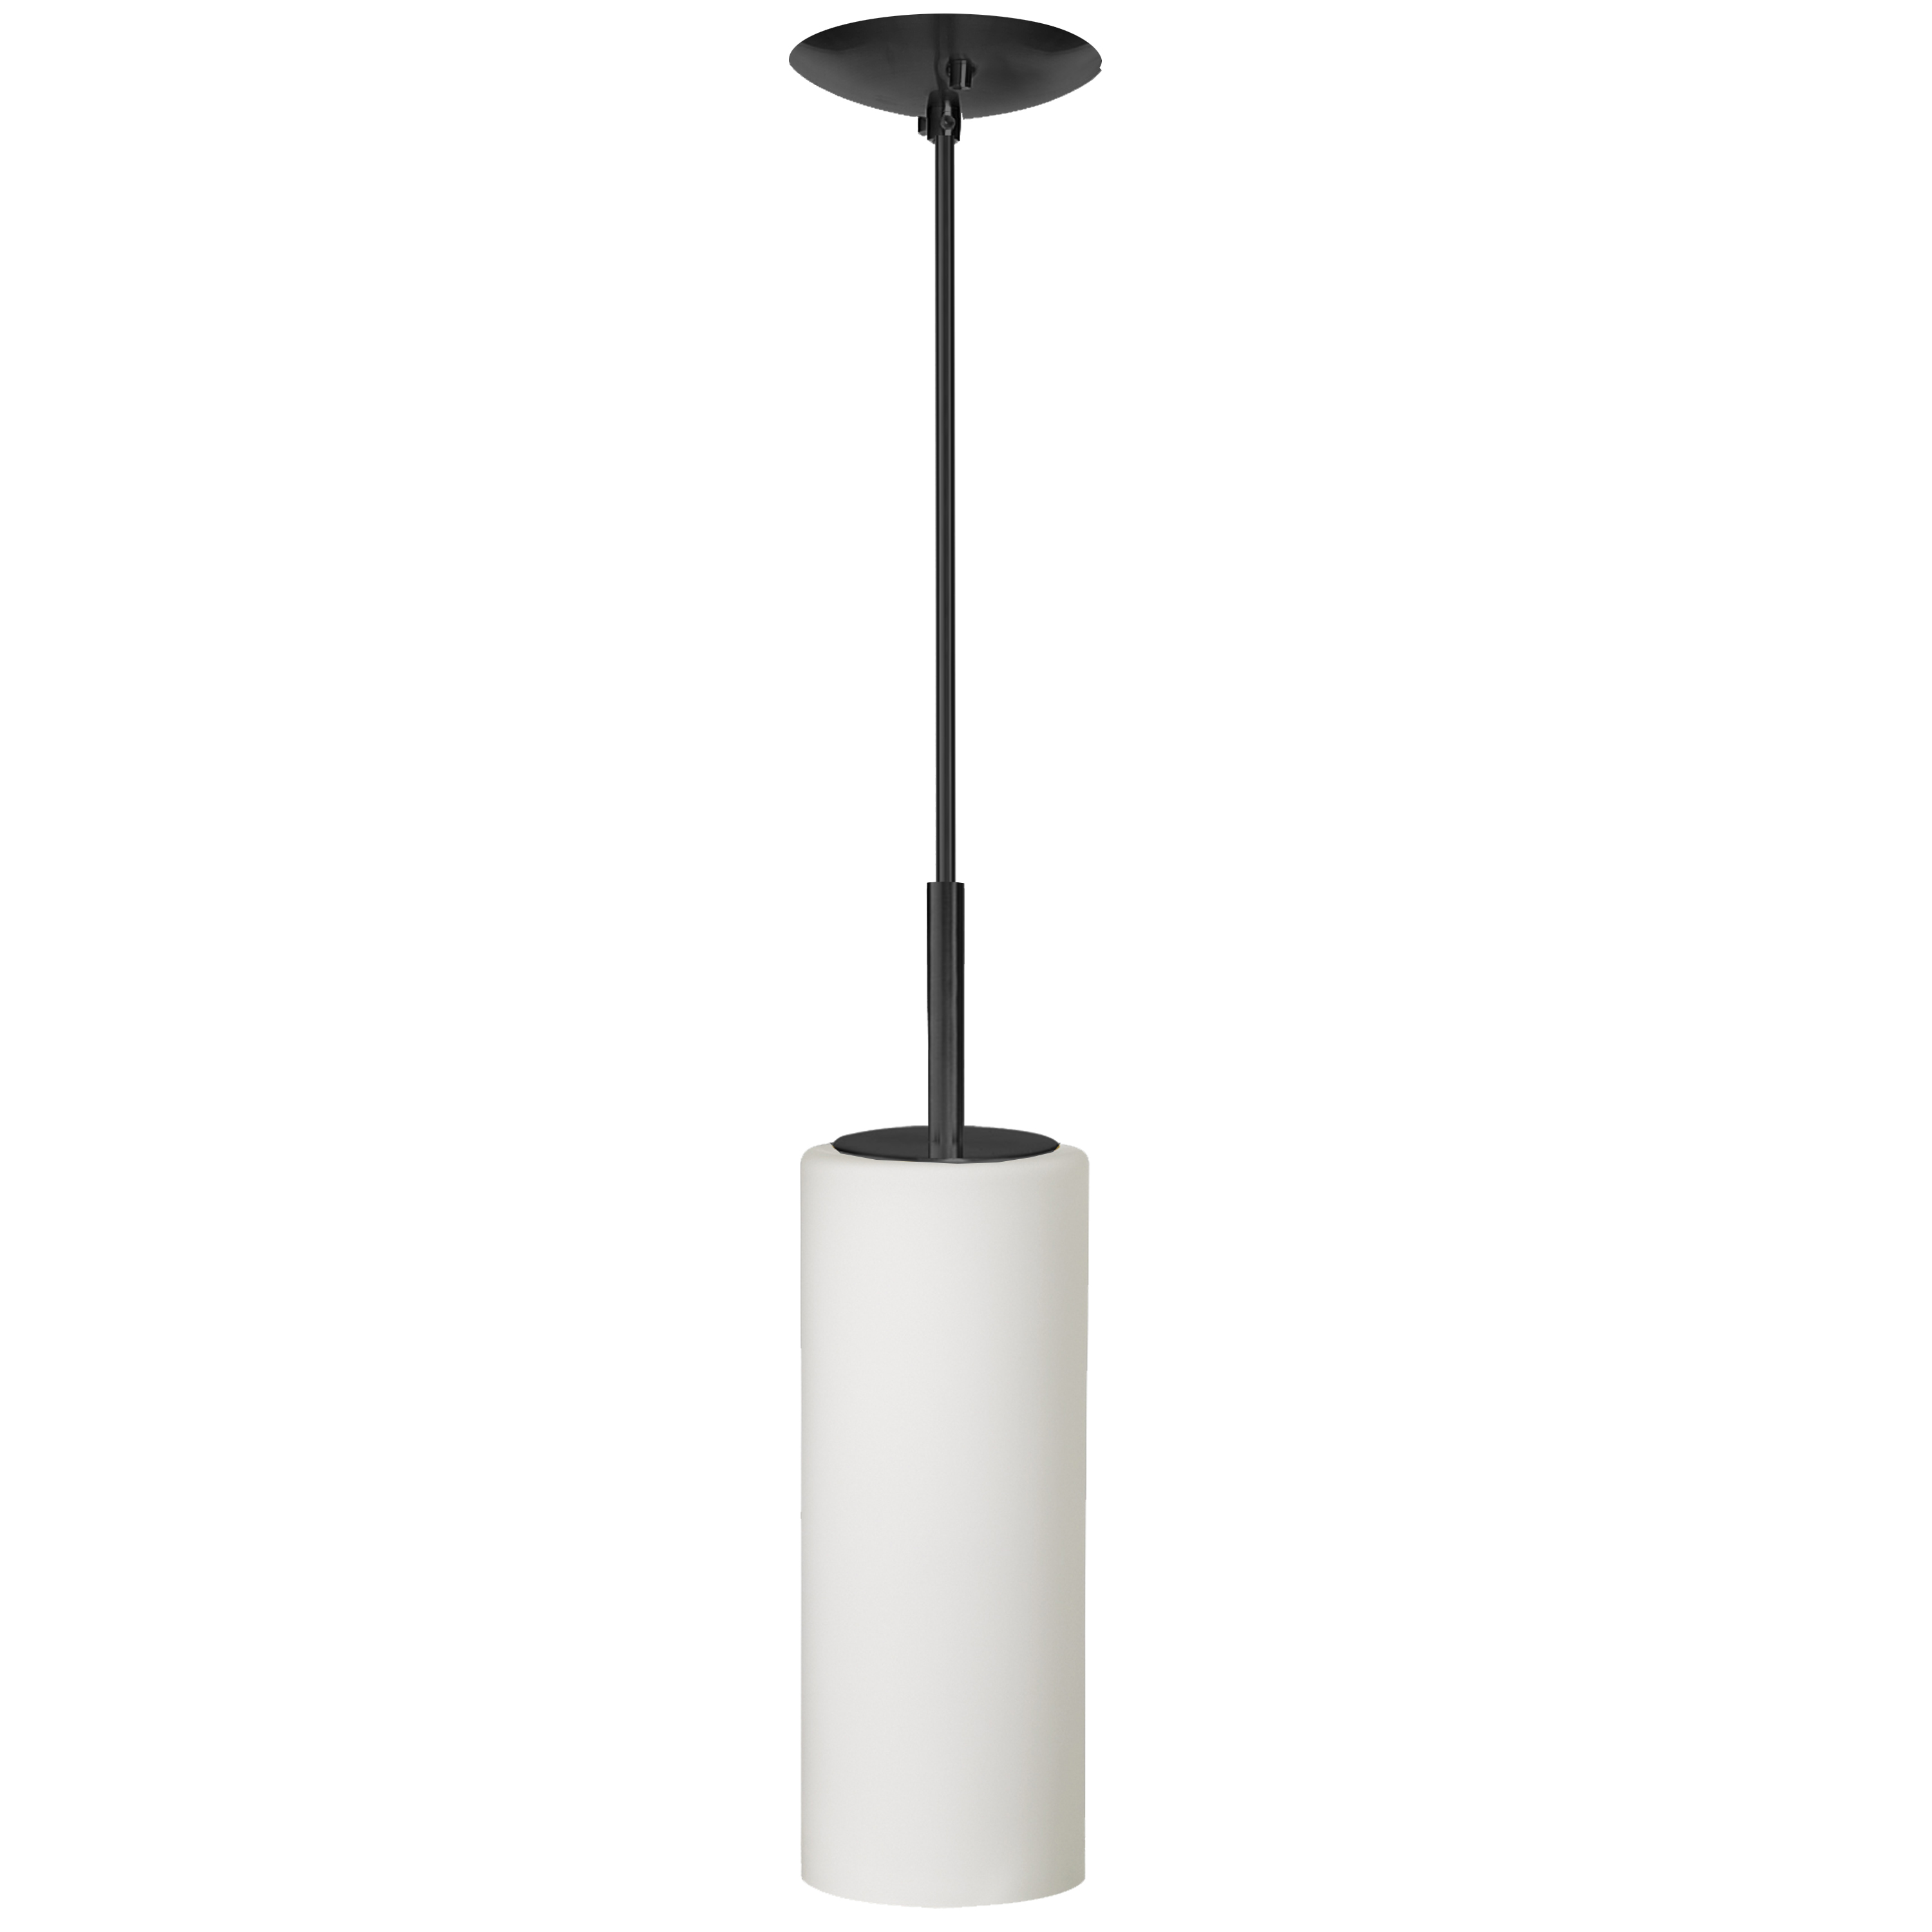 Stylish, with a no-nonsense modern profile, Paza lighting has a versatile appeal that will work with many décor schemes. It offers an unobtrusive silhouette that will enhance the furnishings around it. A straight metal frame comes in a choice of finishes that contrast with the white cylindrical glass housing. It's a simple look that creates skin-friendly light with understated flair in both table and ceiling mounted configurations. With its modest footprint, it's suitable for kitchens and hallways of all sizes, or as an accent lamp in any room.